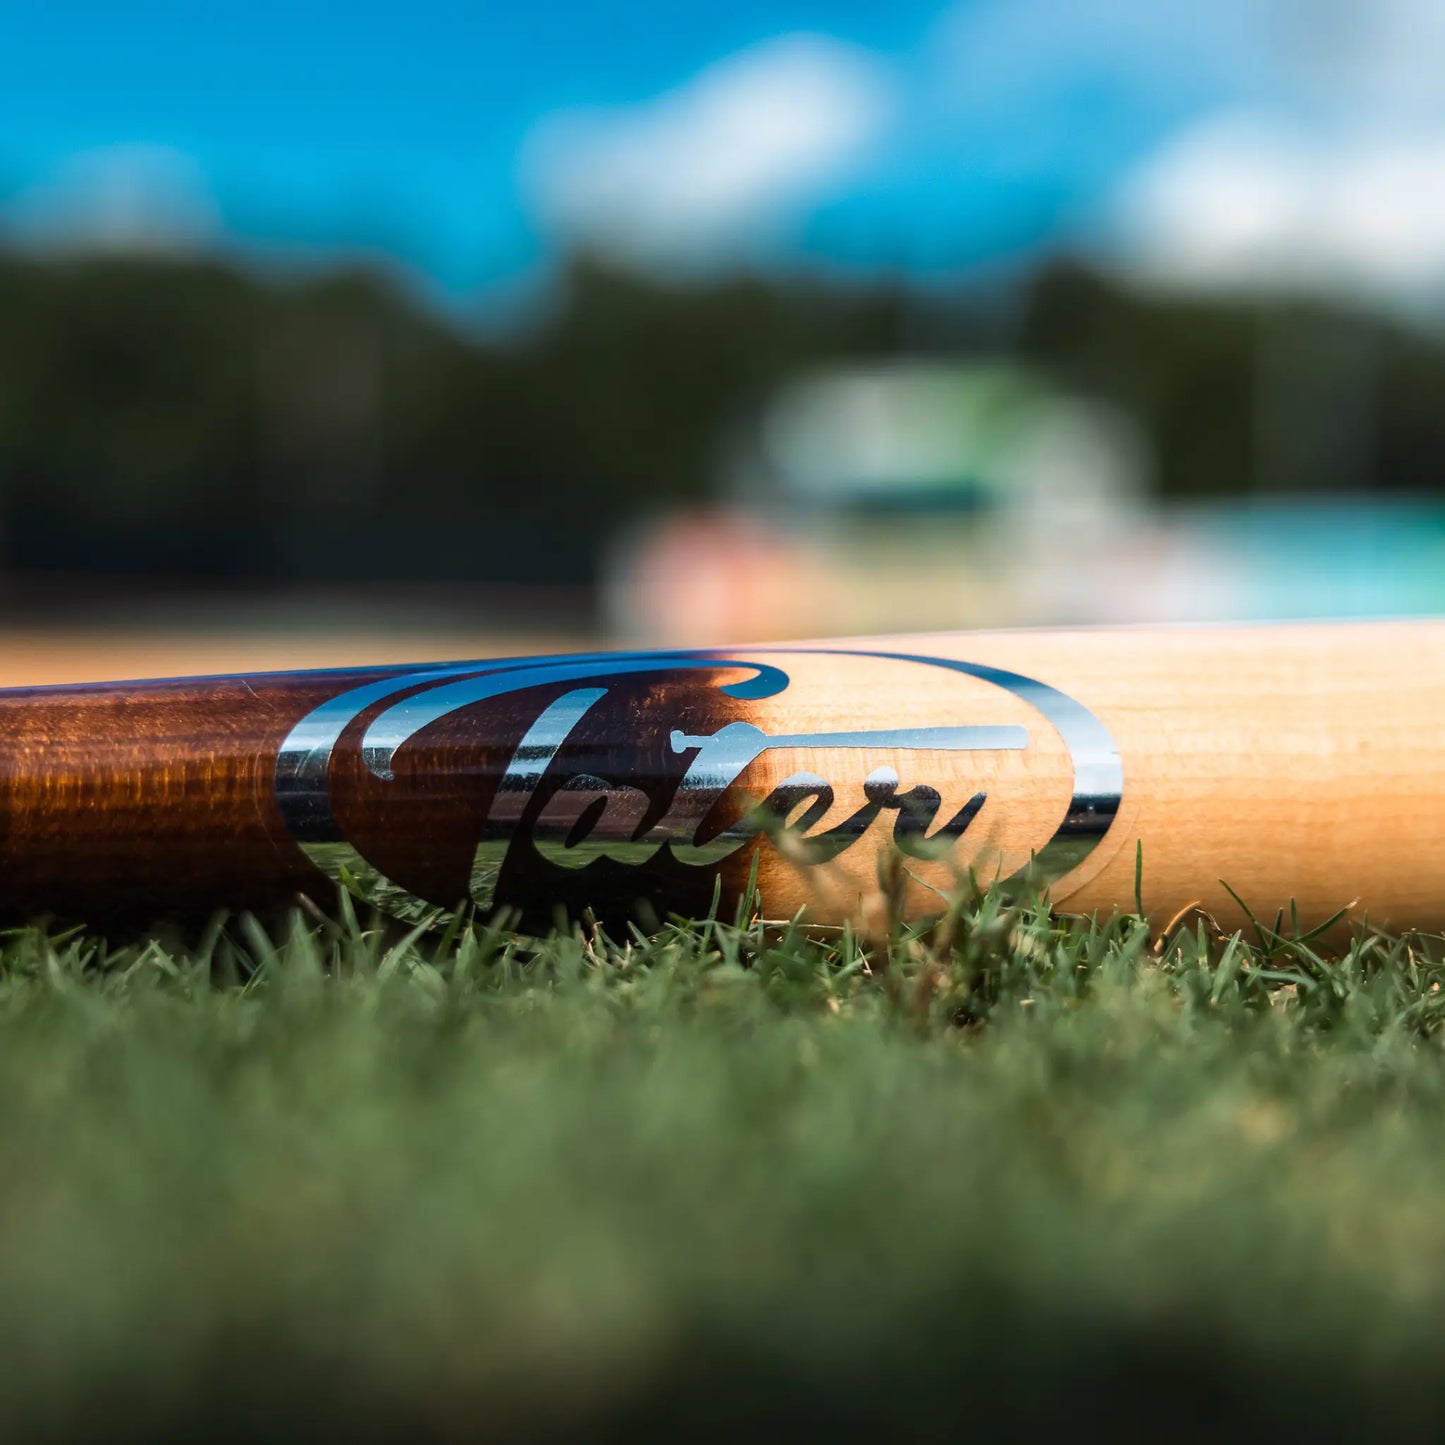 An image showcasing the popular Tater X12 Pro Maple bat, which stands out for its performance on the field, sturdy construction, and timeless style that appeals to competitive players. Bat is resting on grass, closeup of Tater logo.This image captures a close-up view of a Tater X12 Pro Maple bat lying horizontally on the grass. The focus is on the bat's barrel which features the bold, black Tater logo, with a blurred baseball diamond in the background under a bright, clear sky.